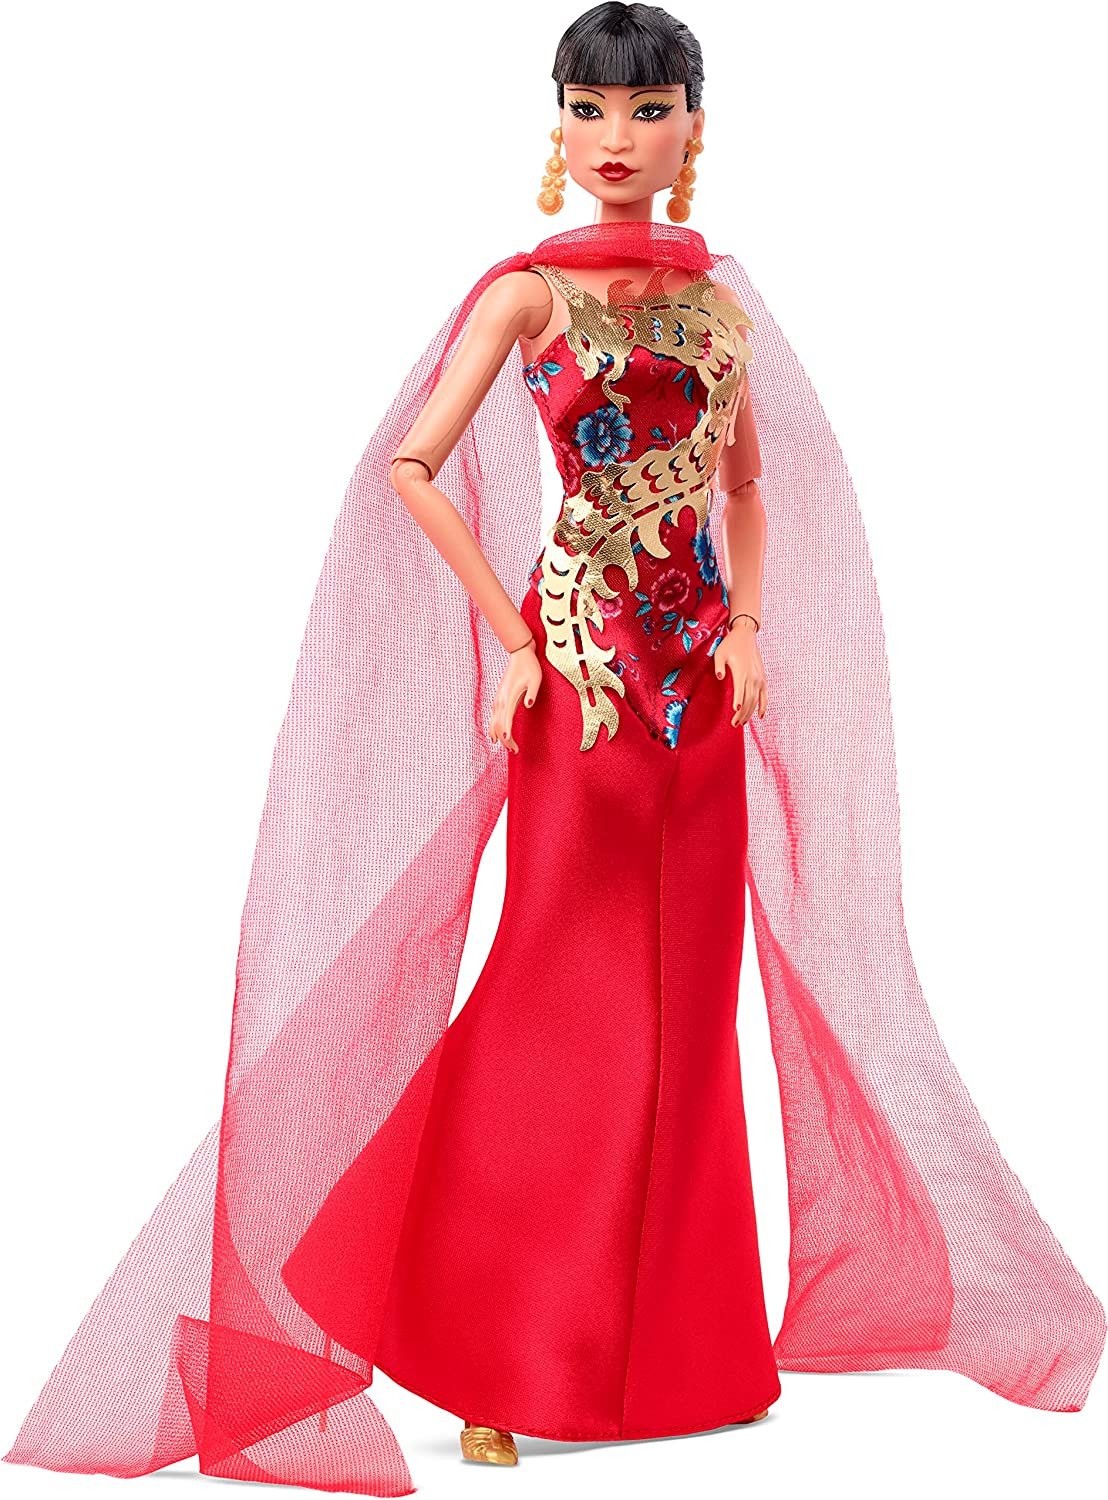 1682926596-youloveit-com-barbie-signature-anna-may-wong-doll